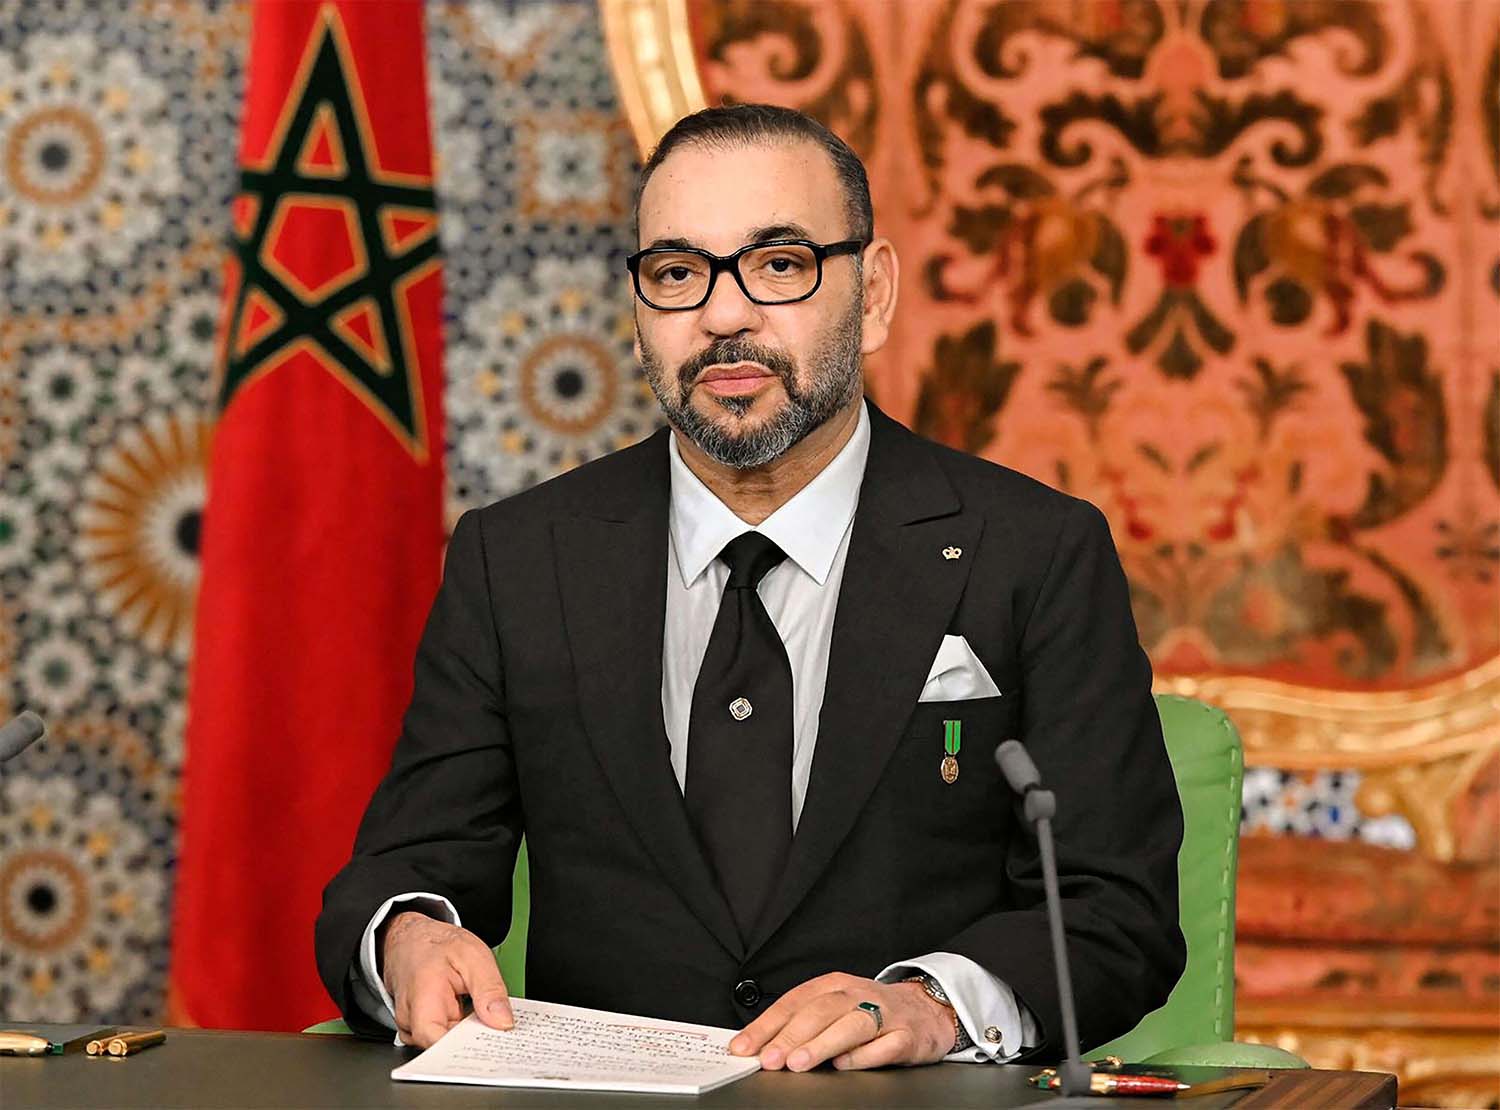 King Mohammed VI expressed his full support for the Palestinian National Authority